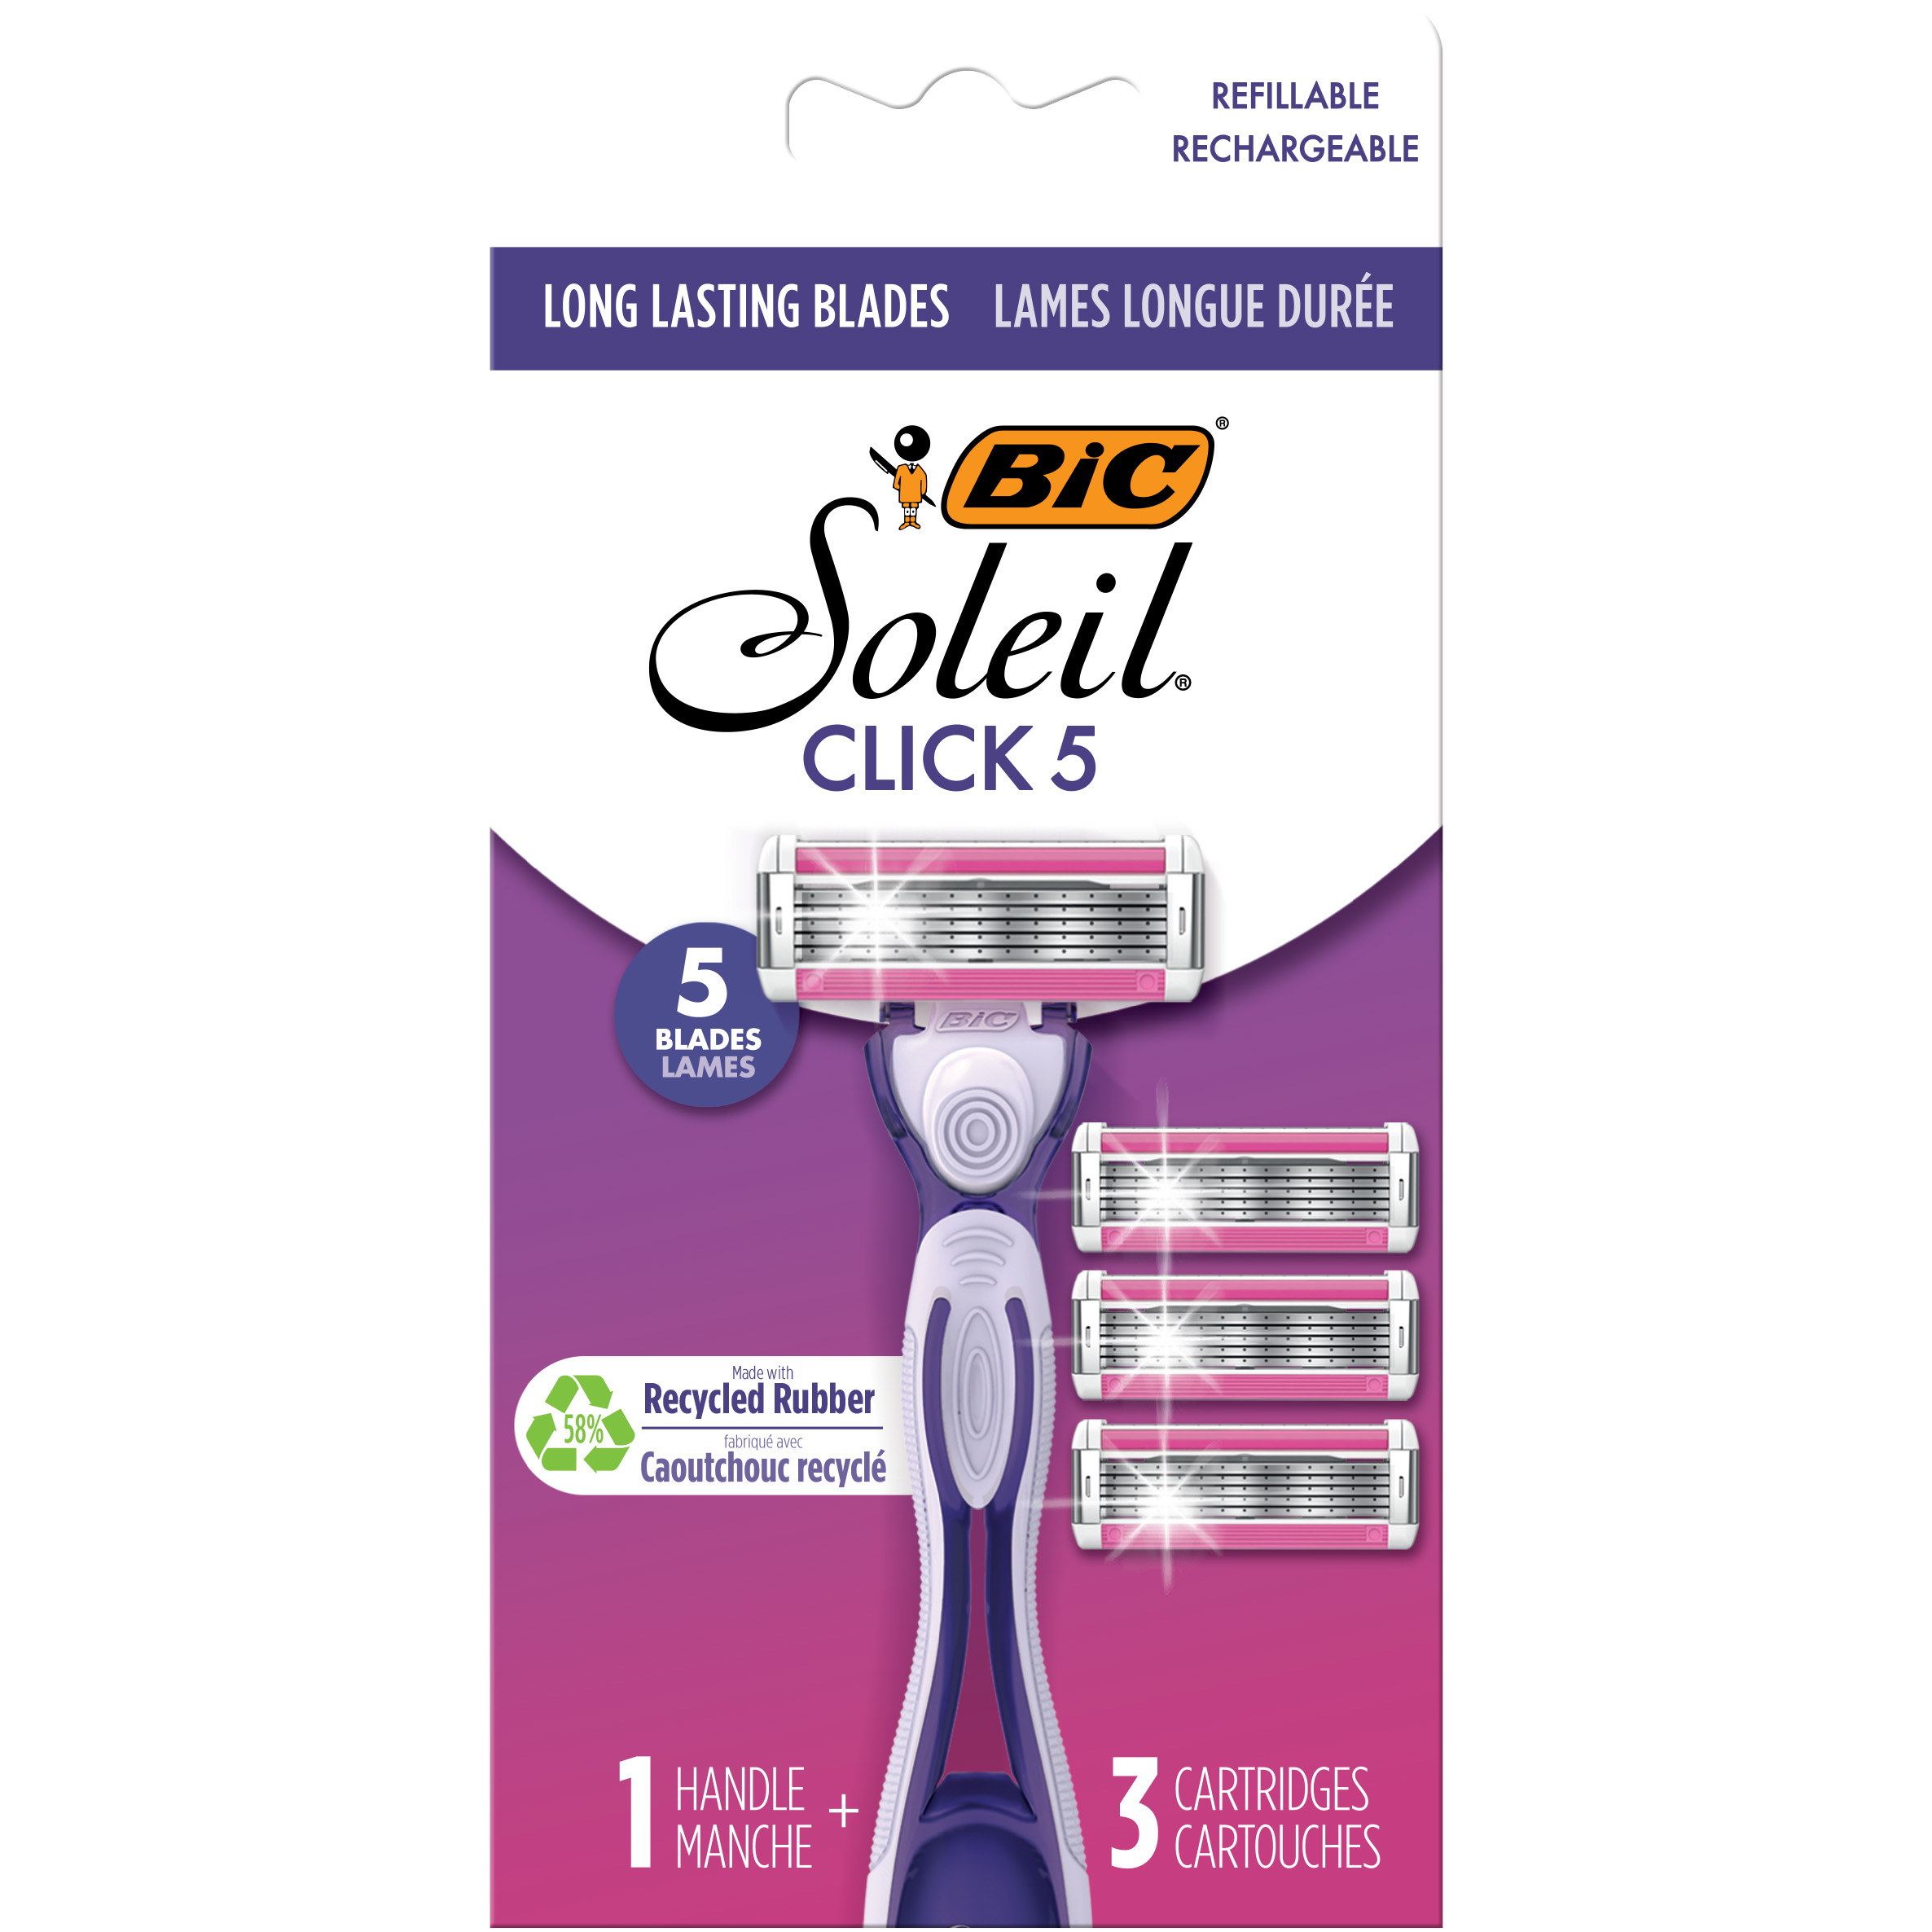 BIC Soleil Click 5 Women's Disposable Razor with Handle, 3 Count - image 1 of 13